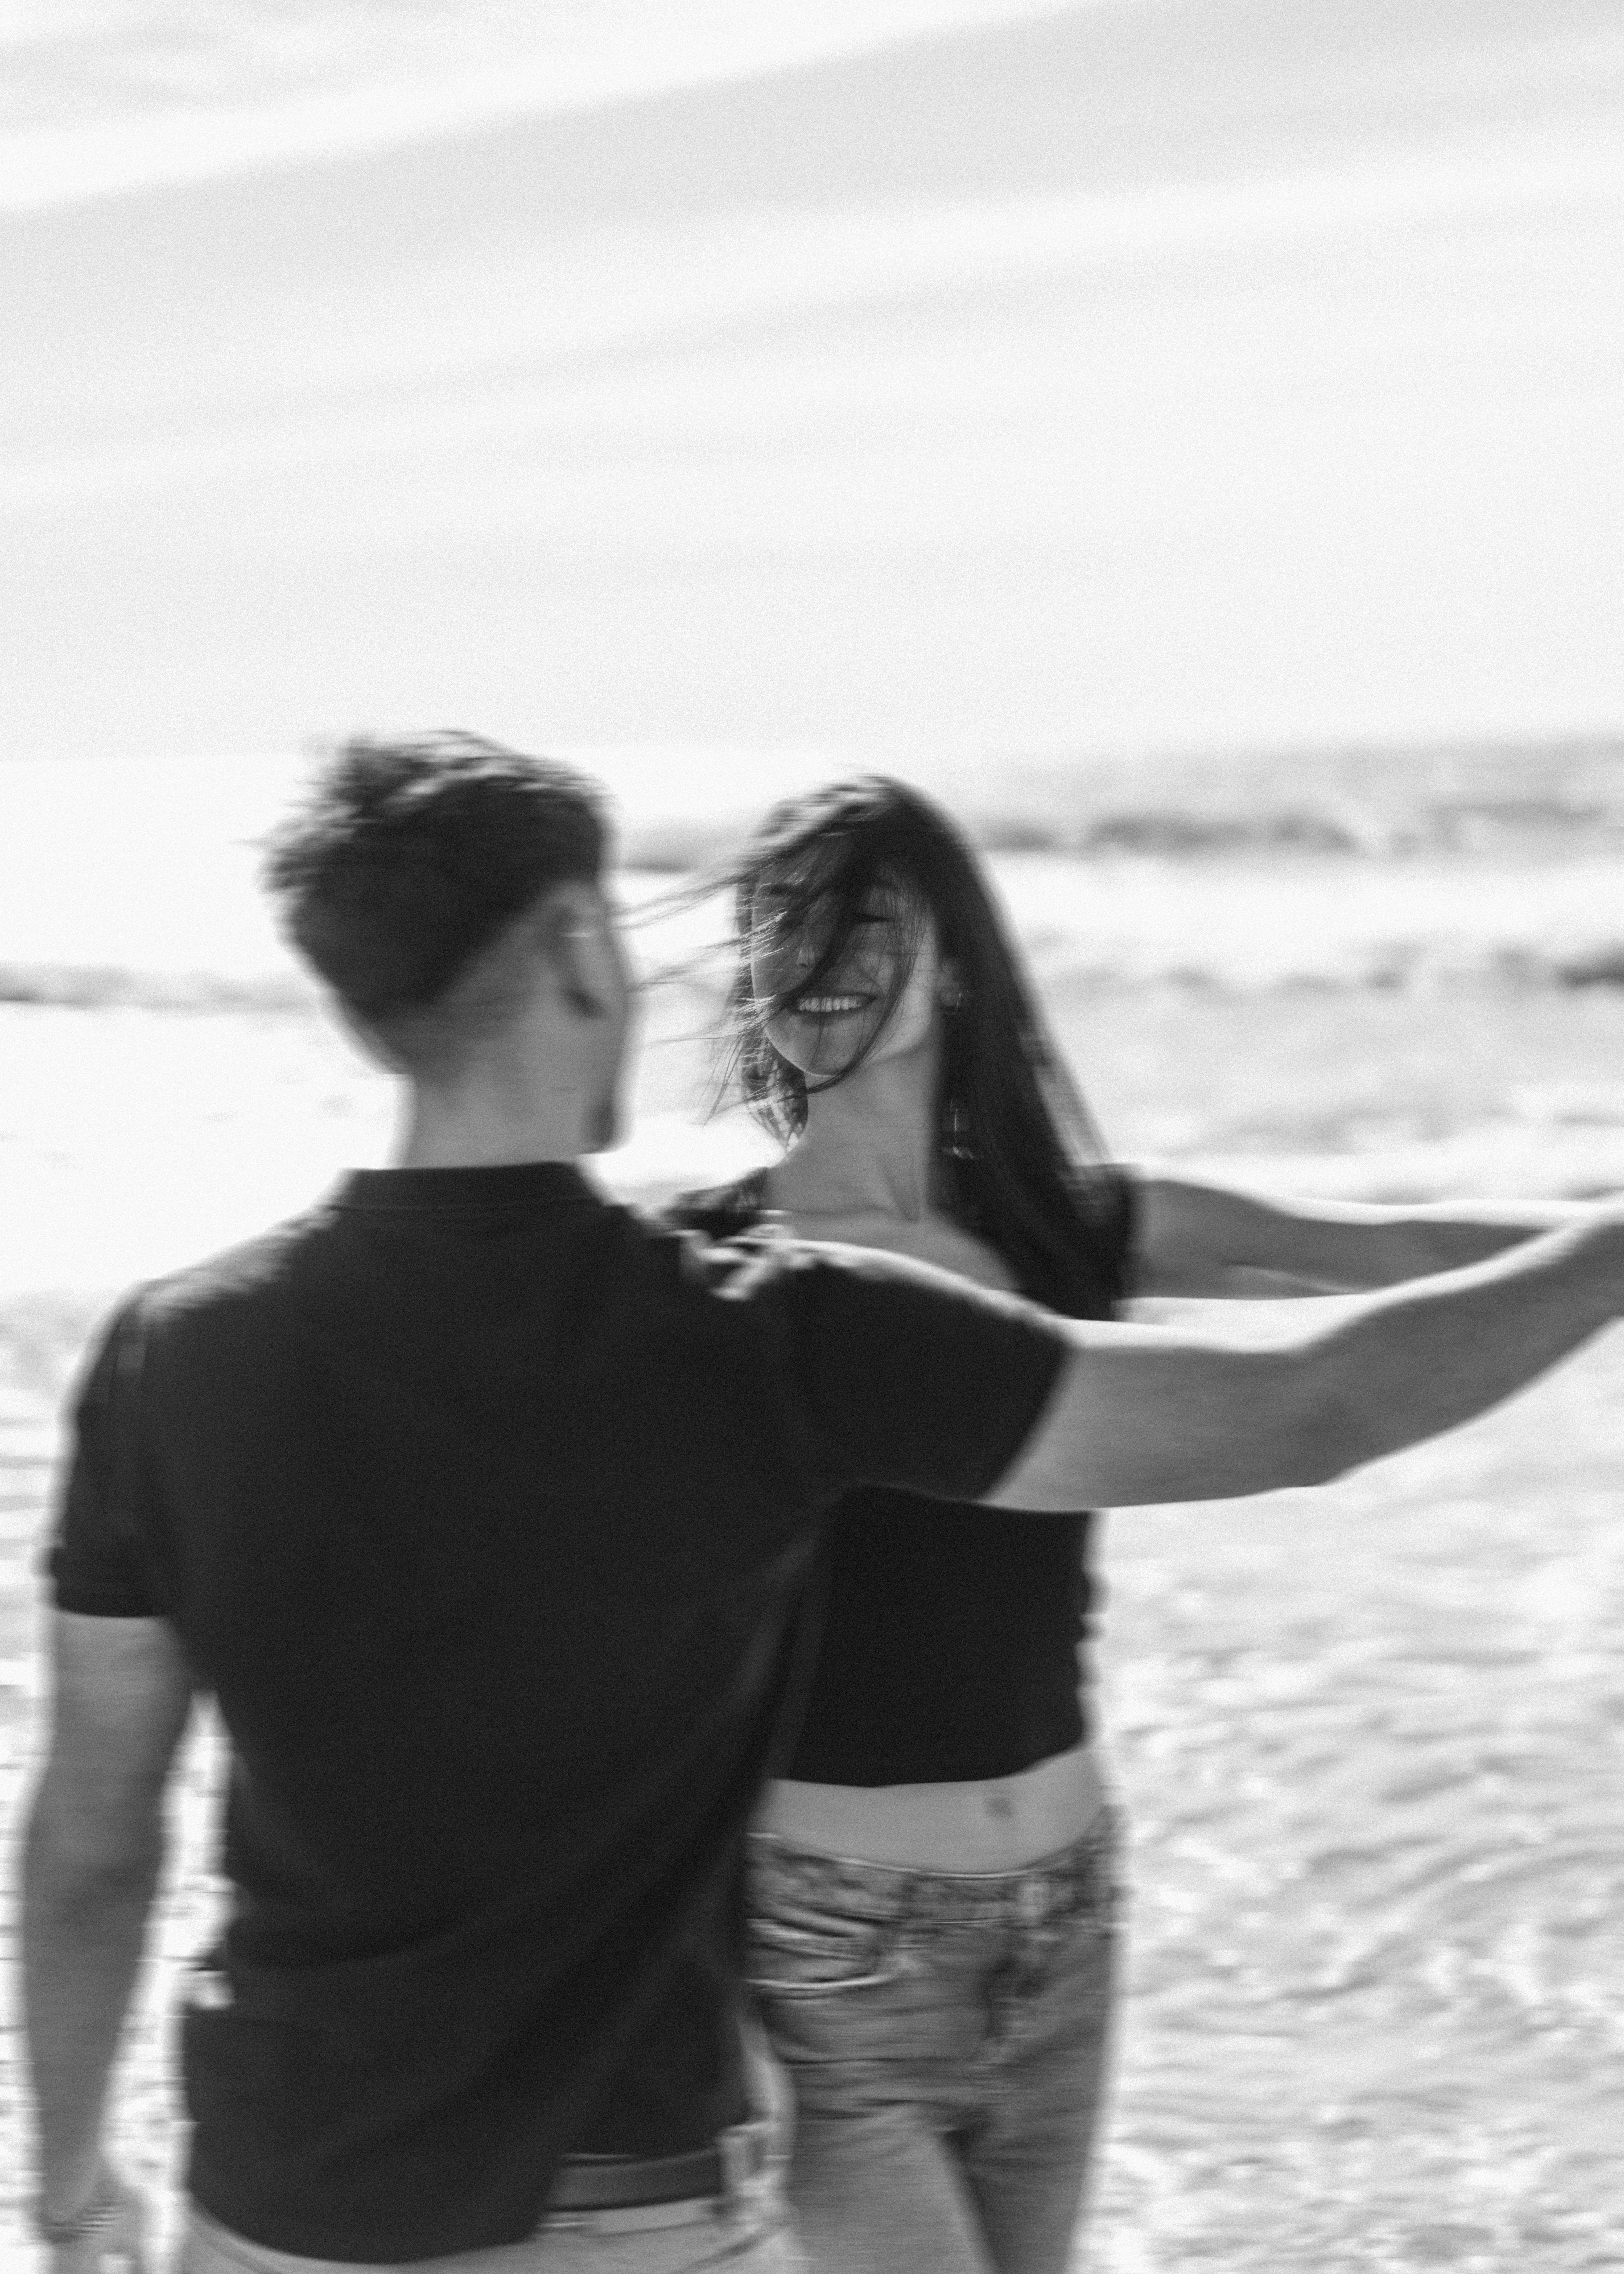 Coastal Whispers: Creative Couple Portraits by Sitges' Beaches